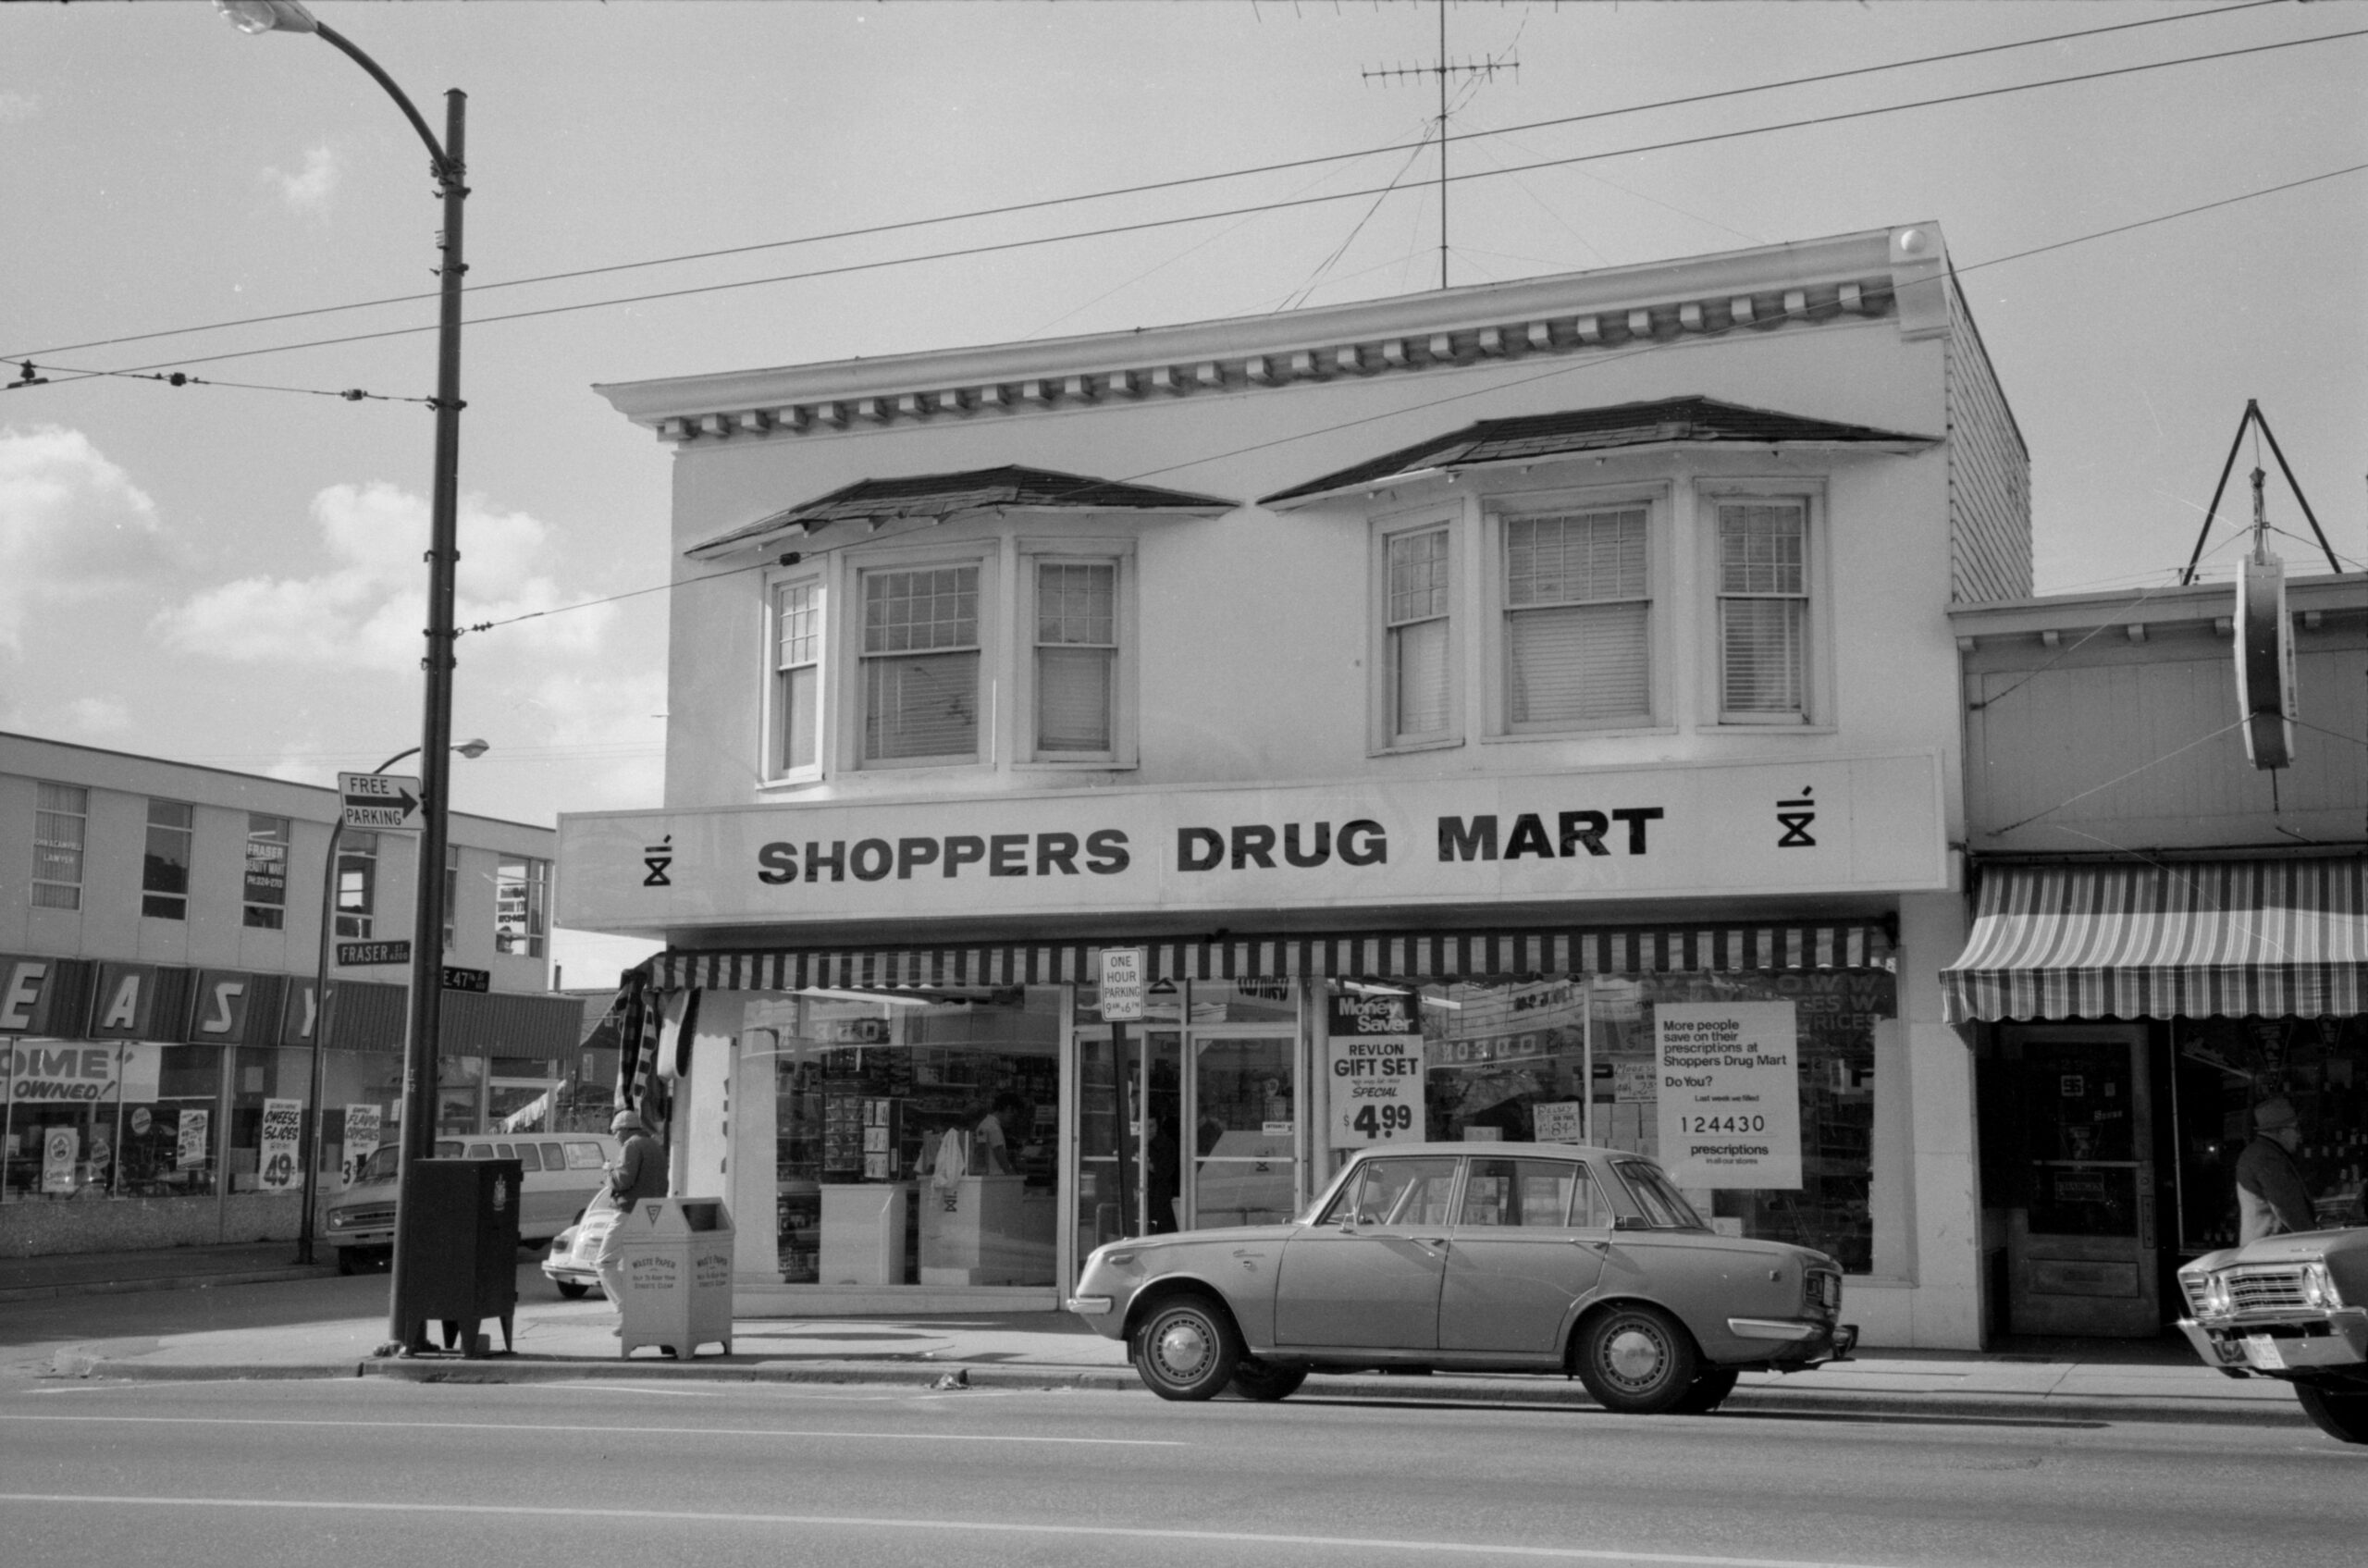 Shoppers Drug Mart at the intersection of Fraser St. and East 47th Ave. Reference code: COV-S644: CVA 1095-02192